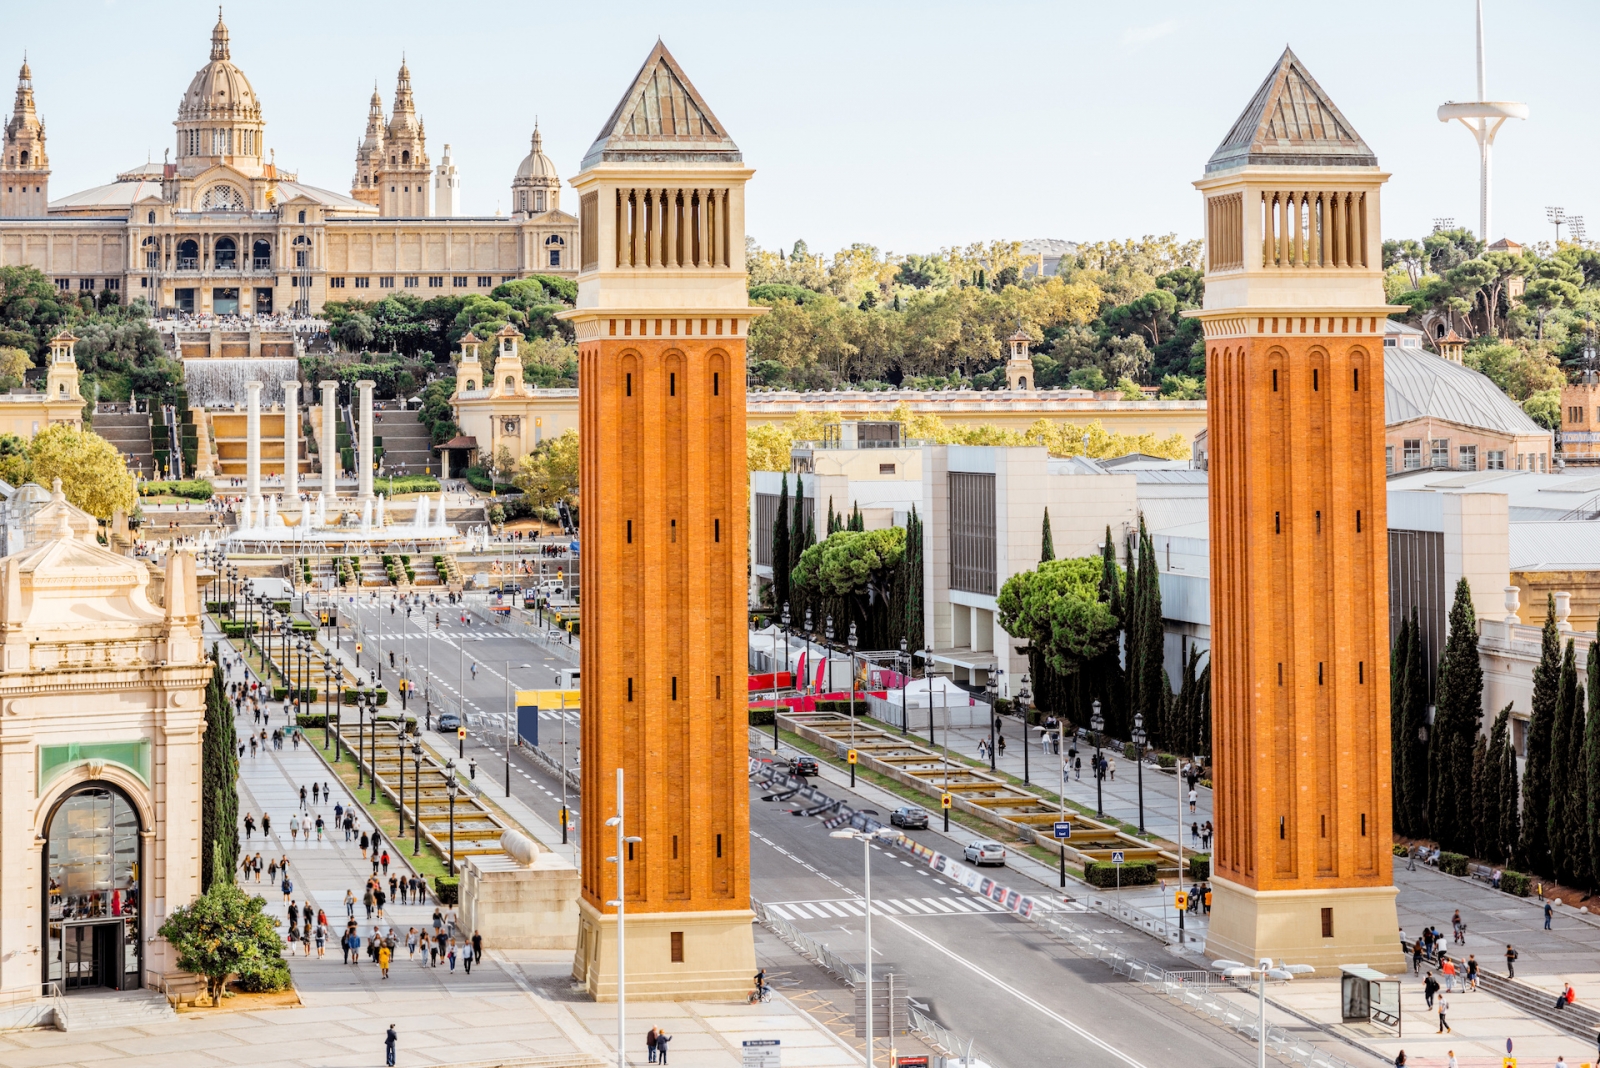 View on the Venetian columns and Art museum on the Spain square in Barcelona city